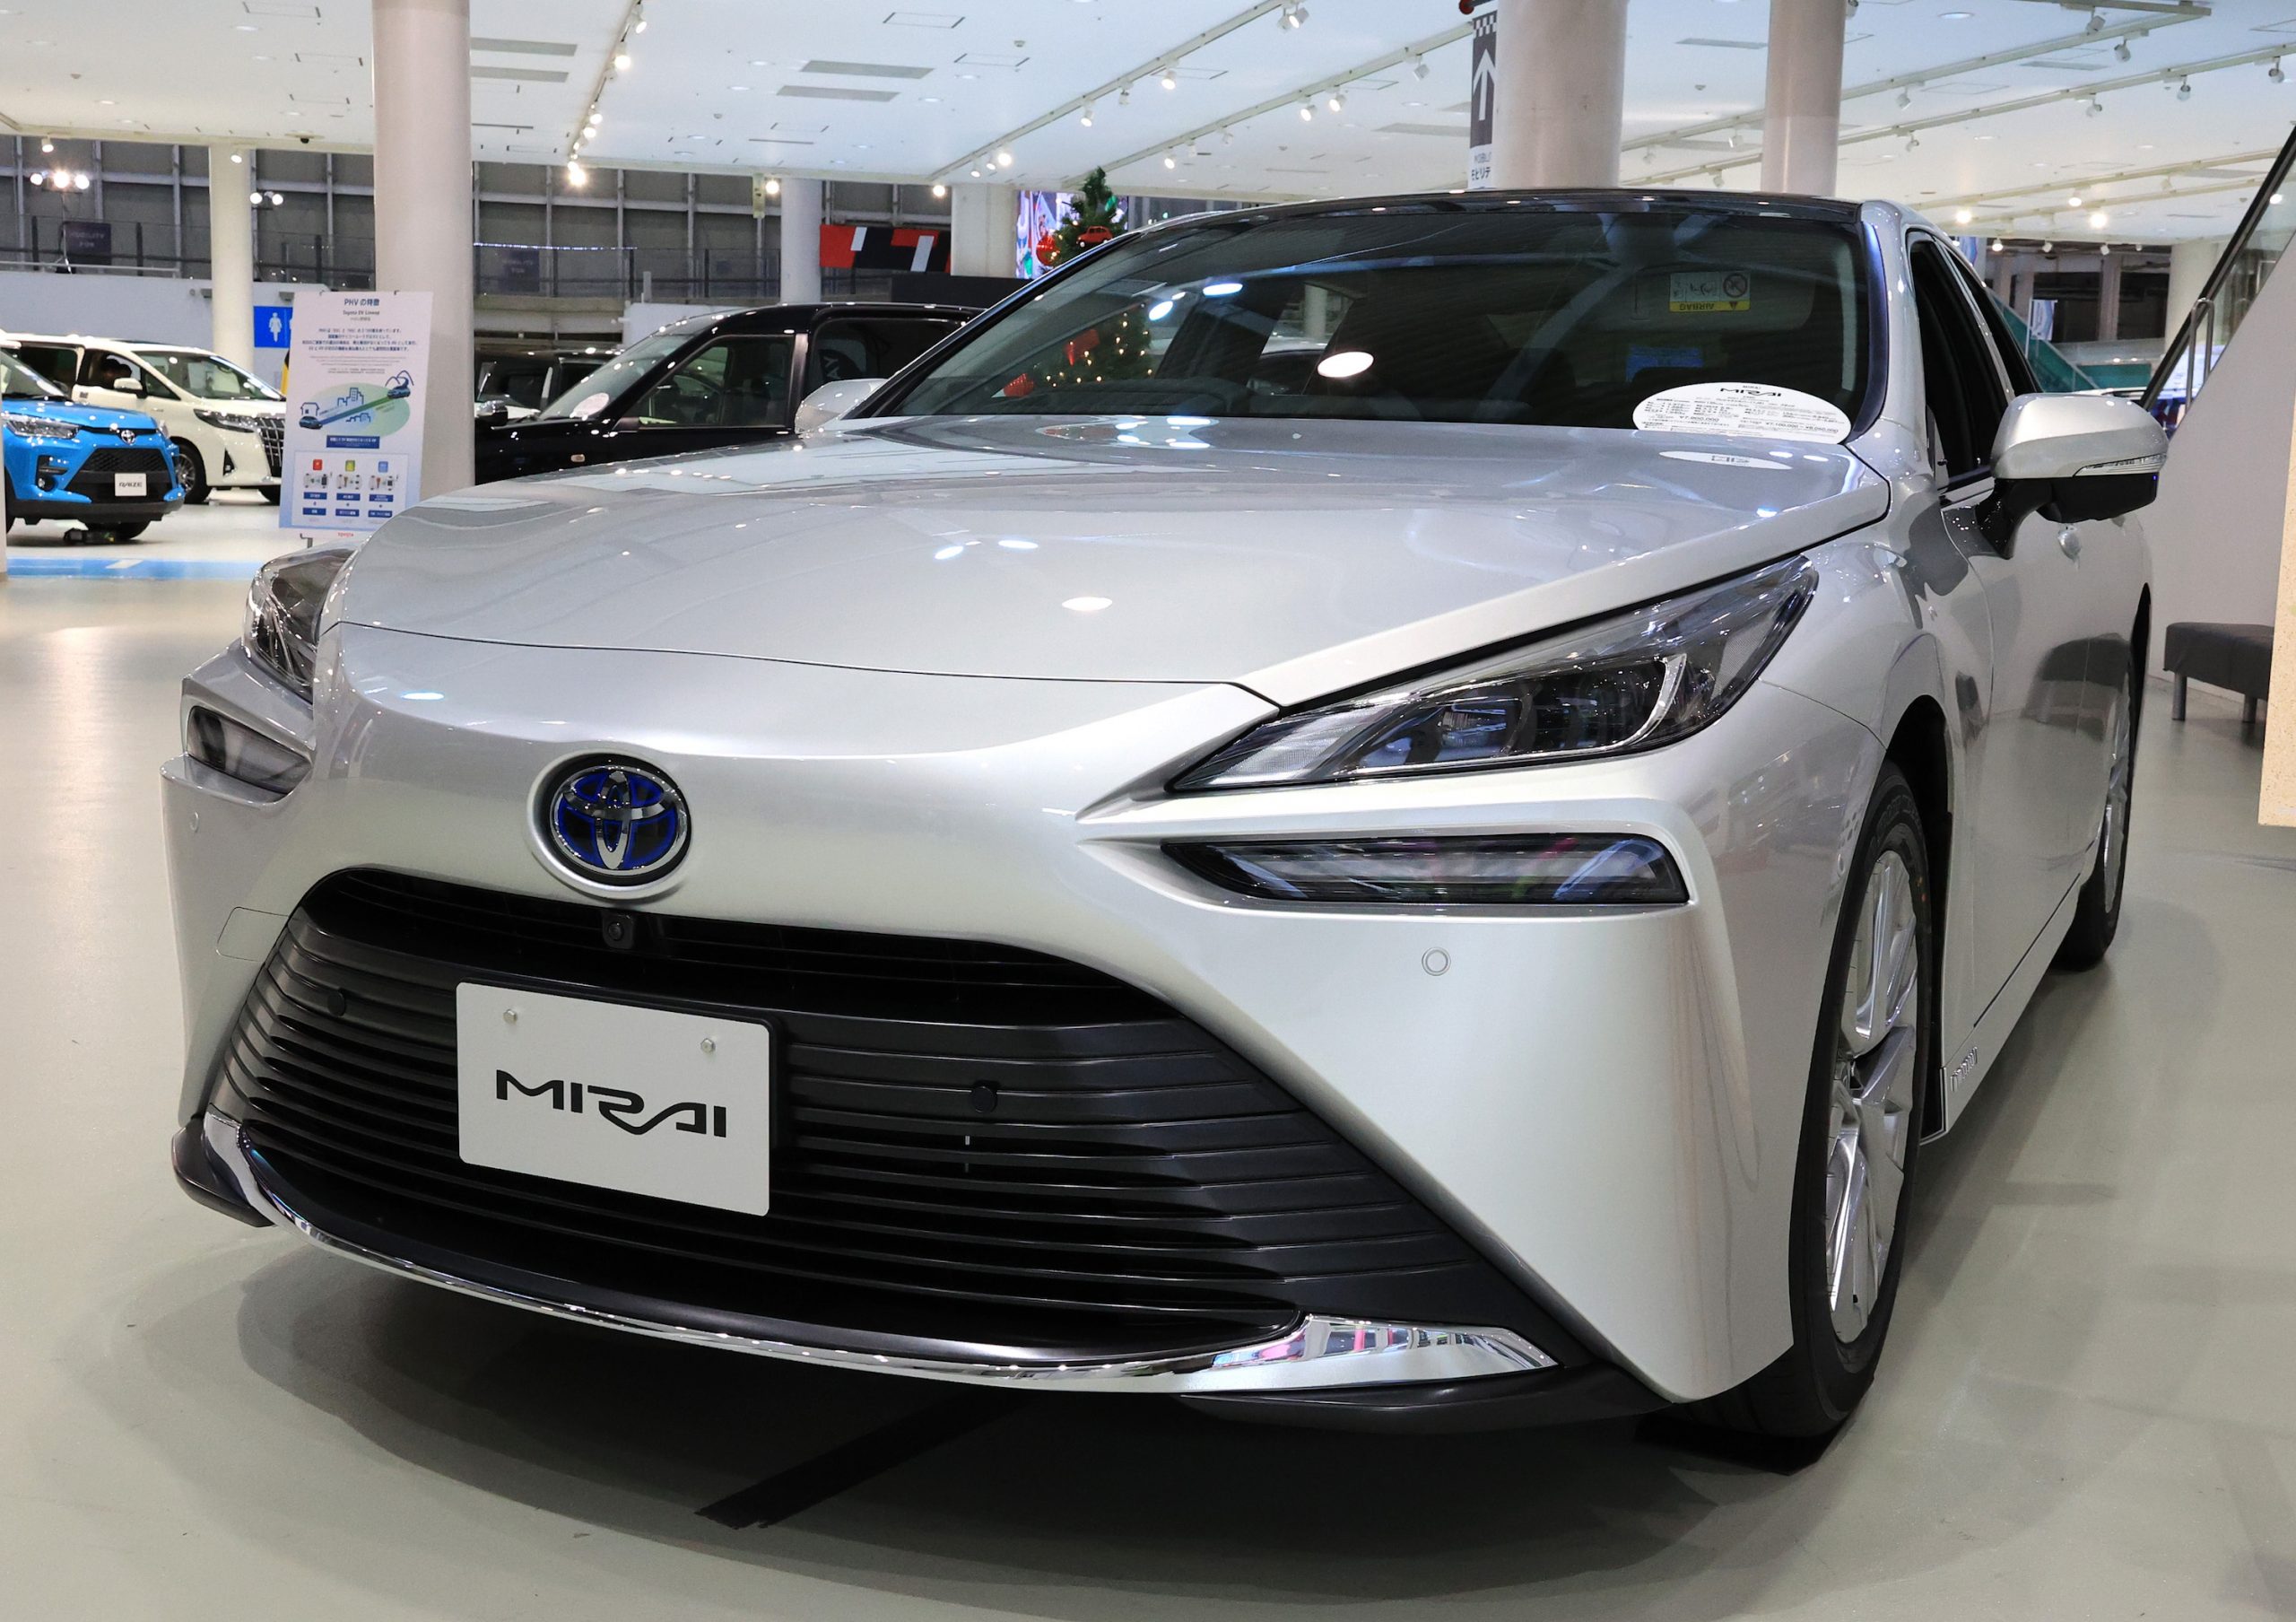 Japanese automobile giant displays the new fuel cell vehicle "Mirai" at the company's showroom in Tokyo